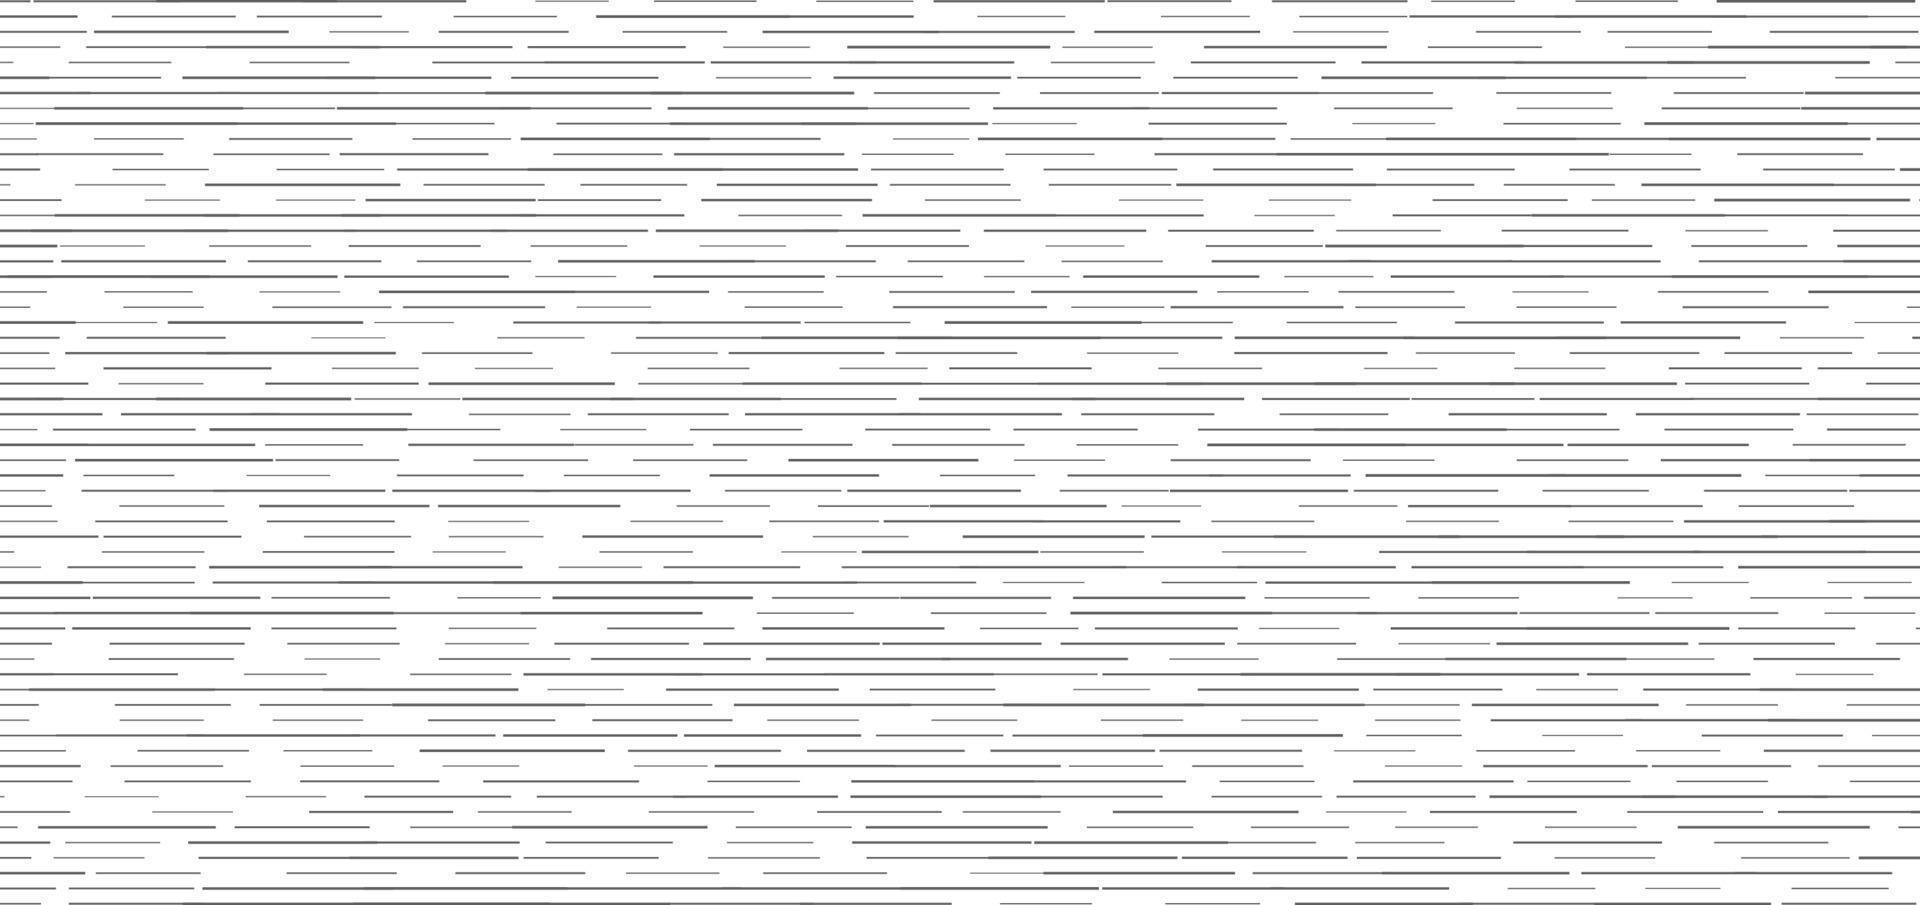 Abstract black horizontal dashed lines seamless pattern on white background vector